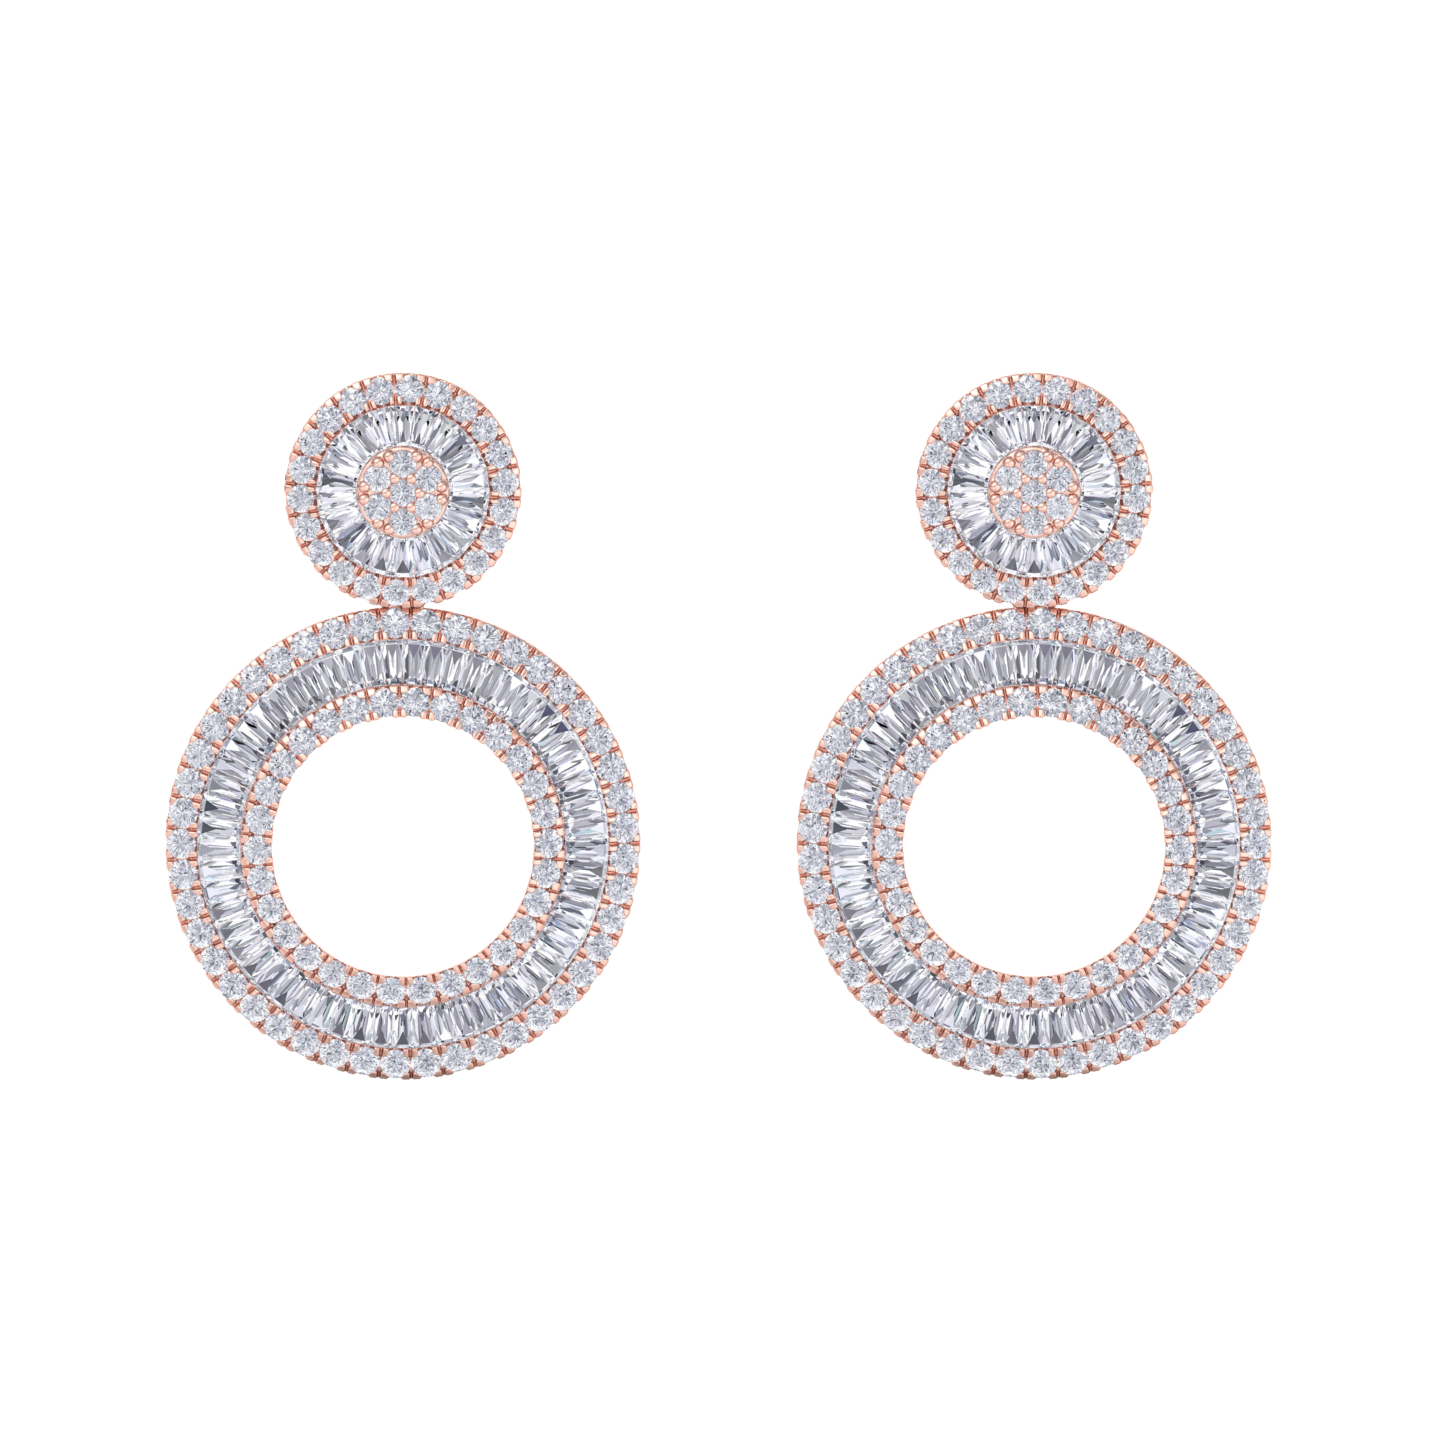 Round dangle earrings in rose gold with white diamonds of 7.27 ct in weight